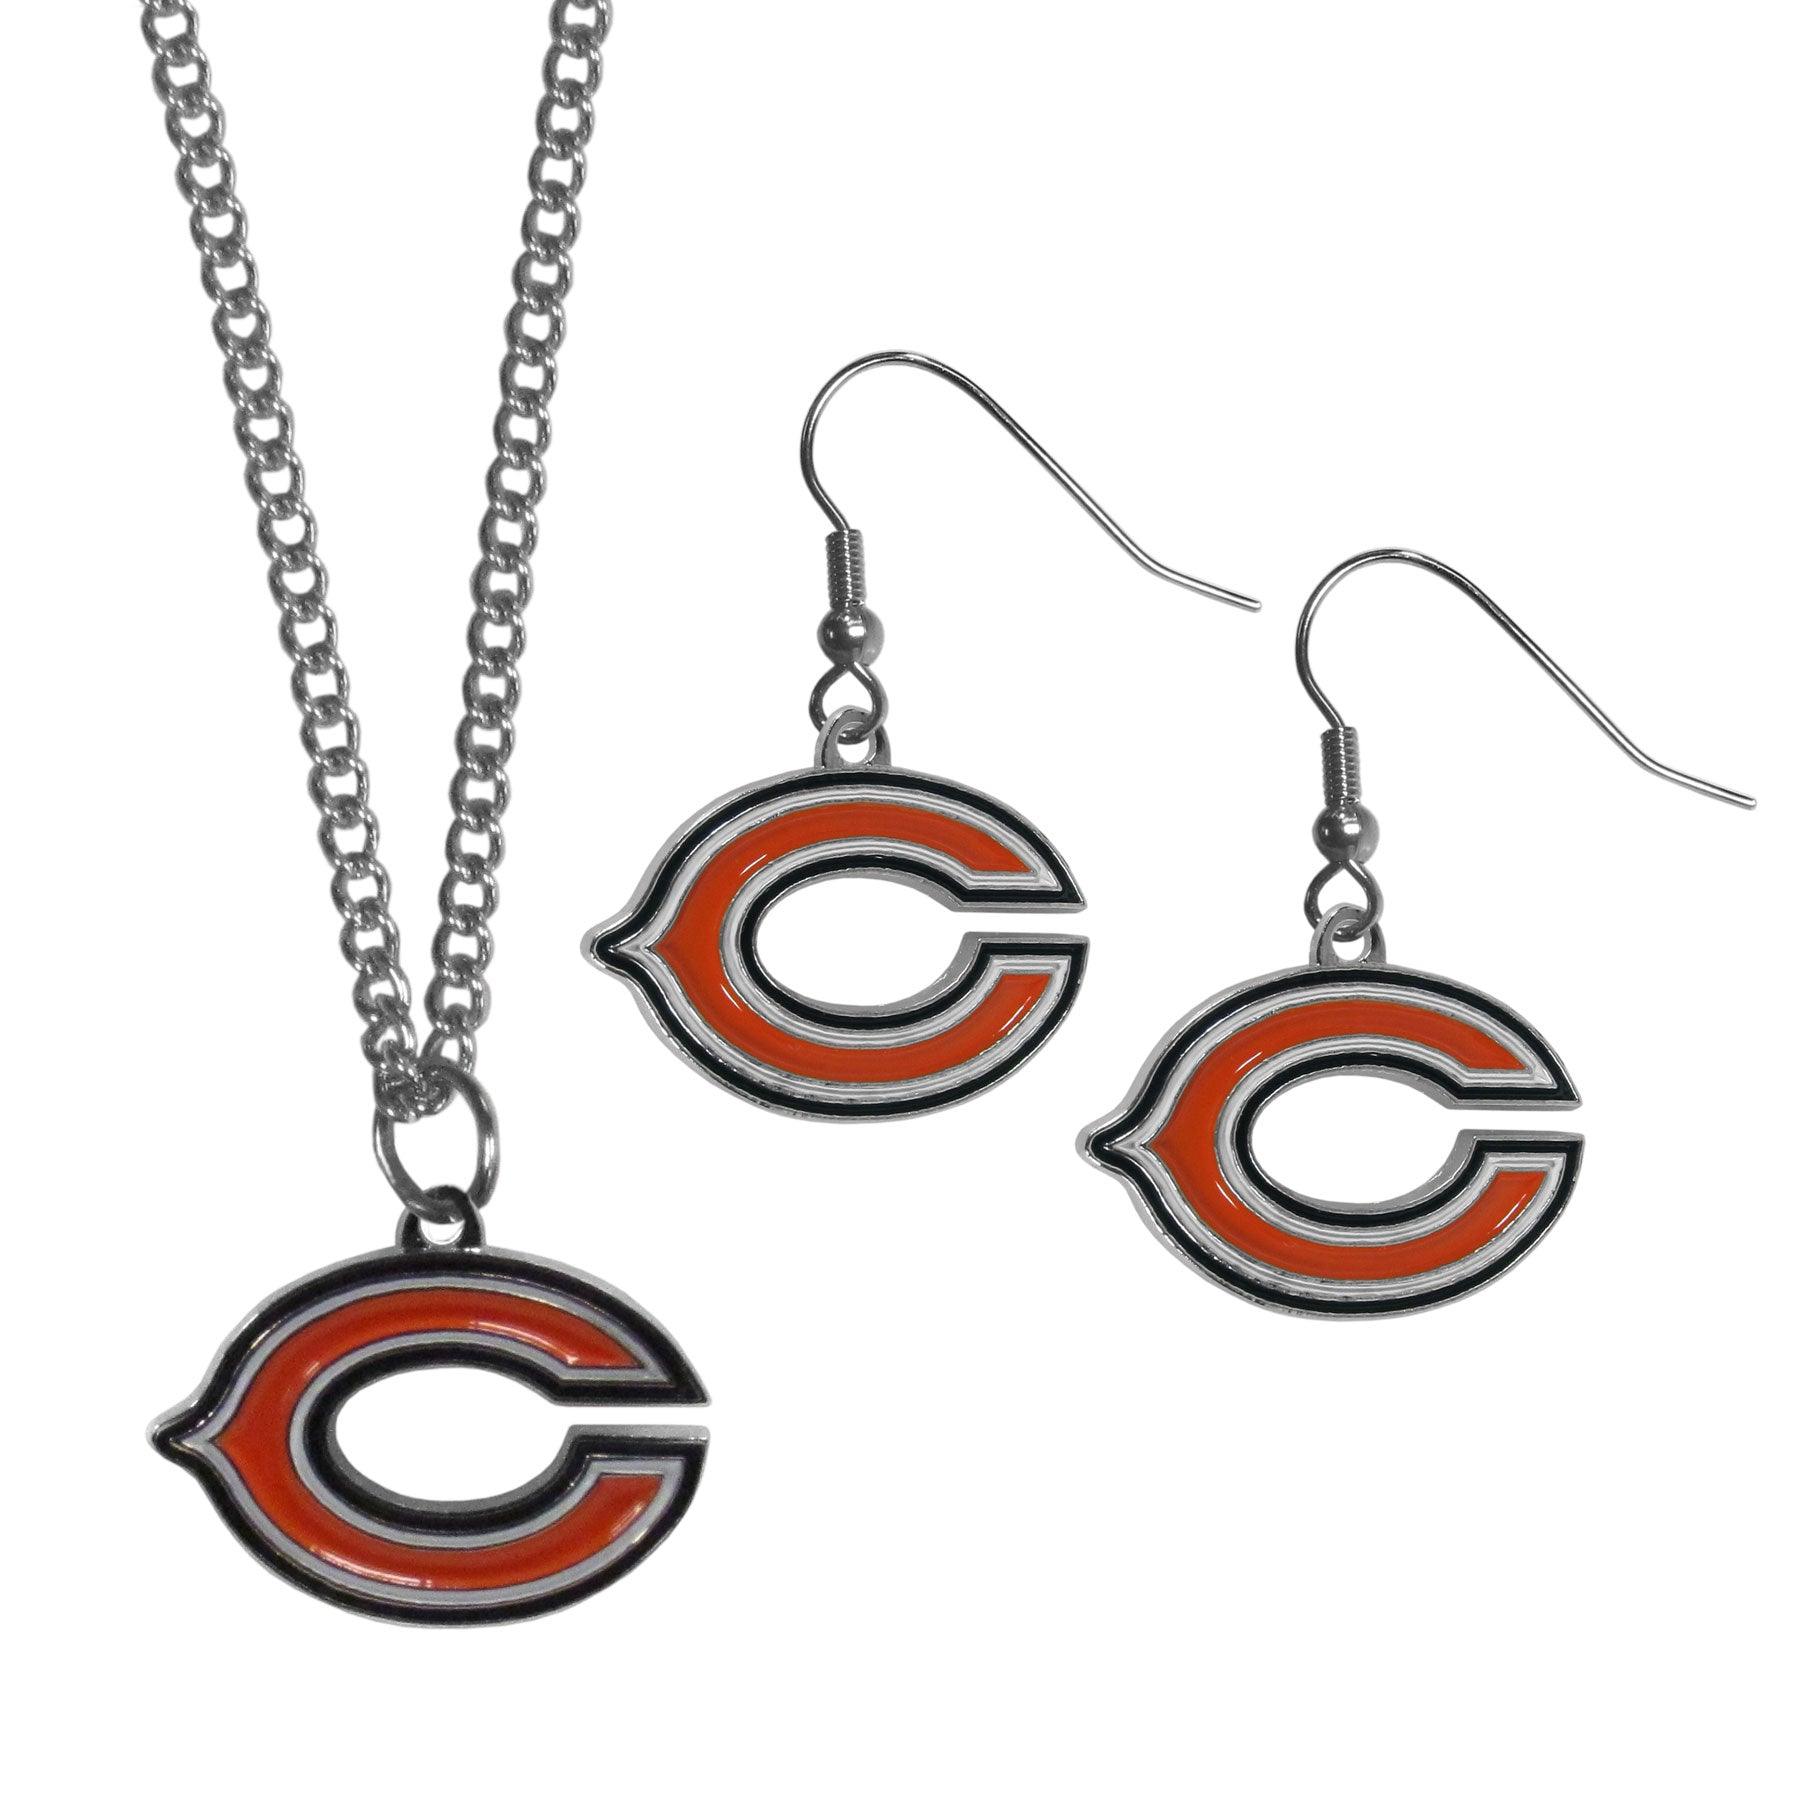 Chicago Bears Dangle Earrings and Chain Necklace Set - Flyclothing LLC